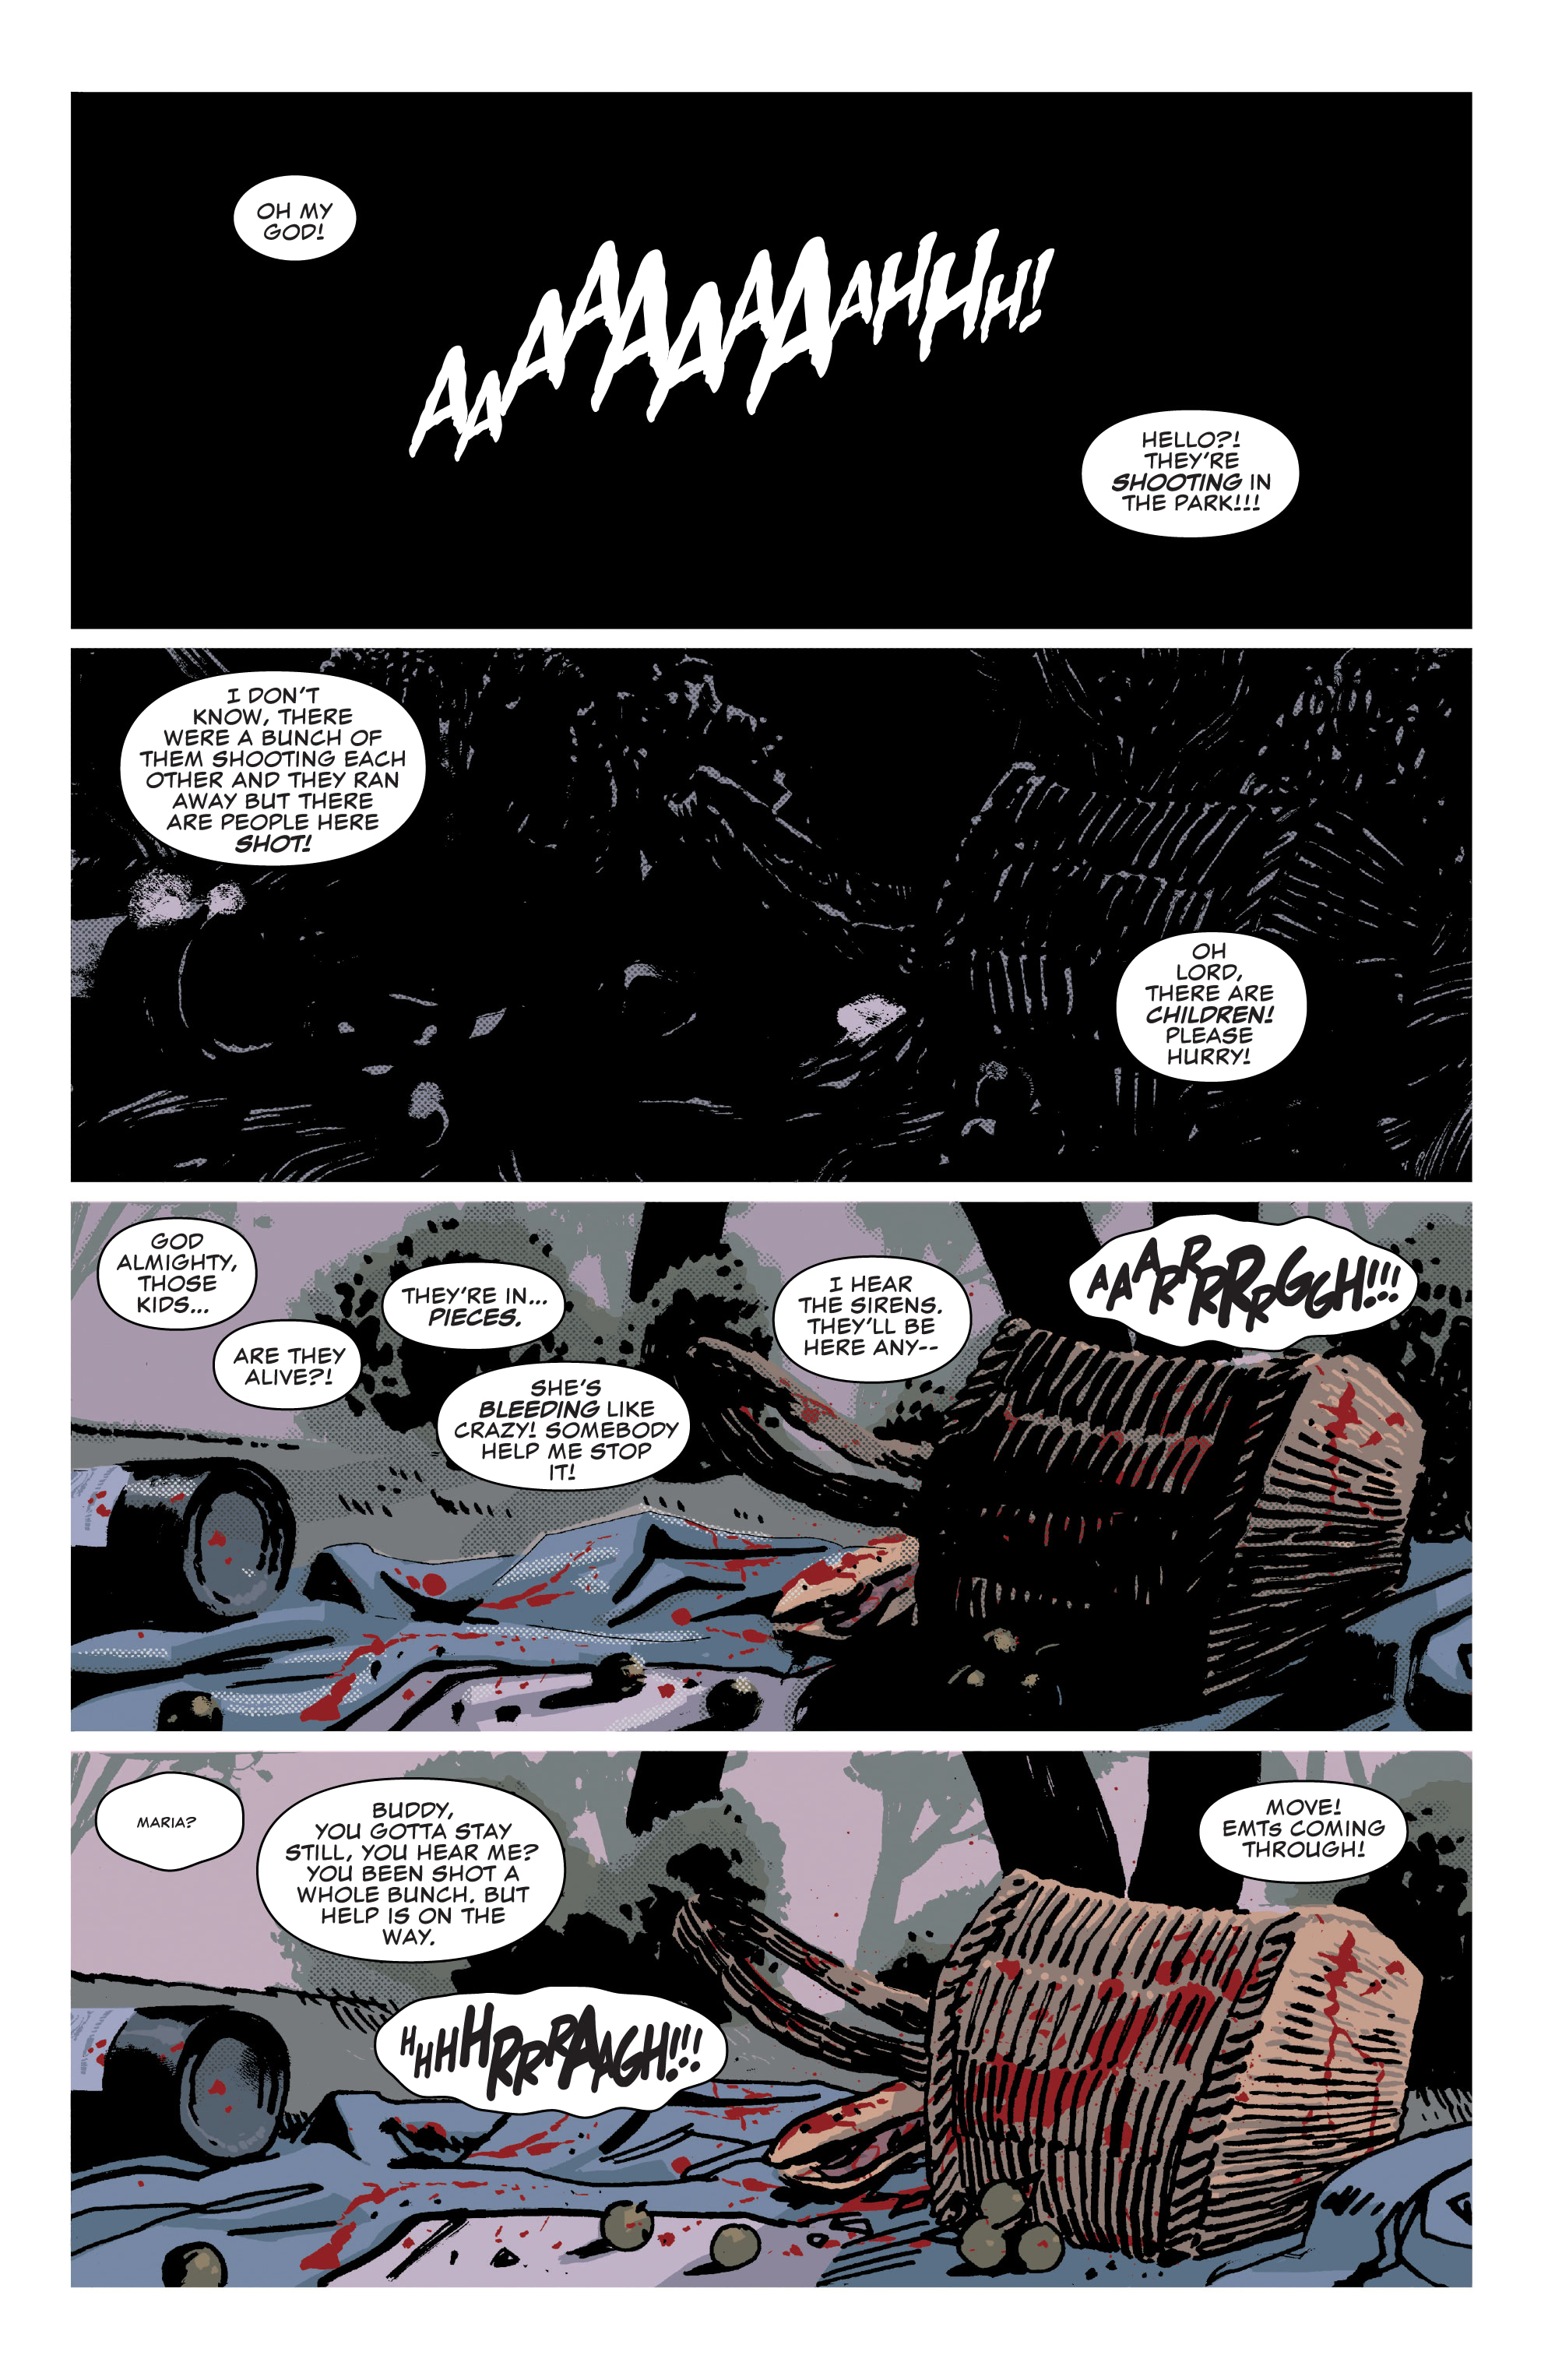 Punisher (2022-): Chapter 1 - Page 2